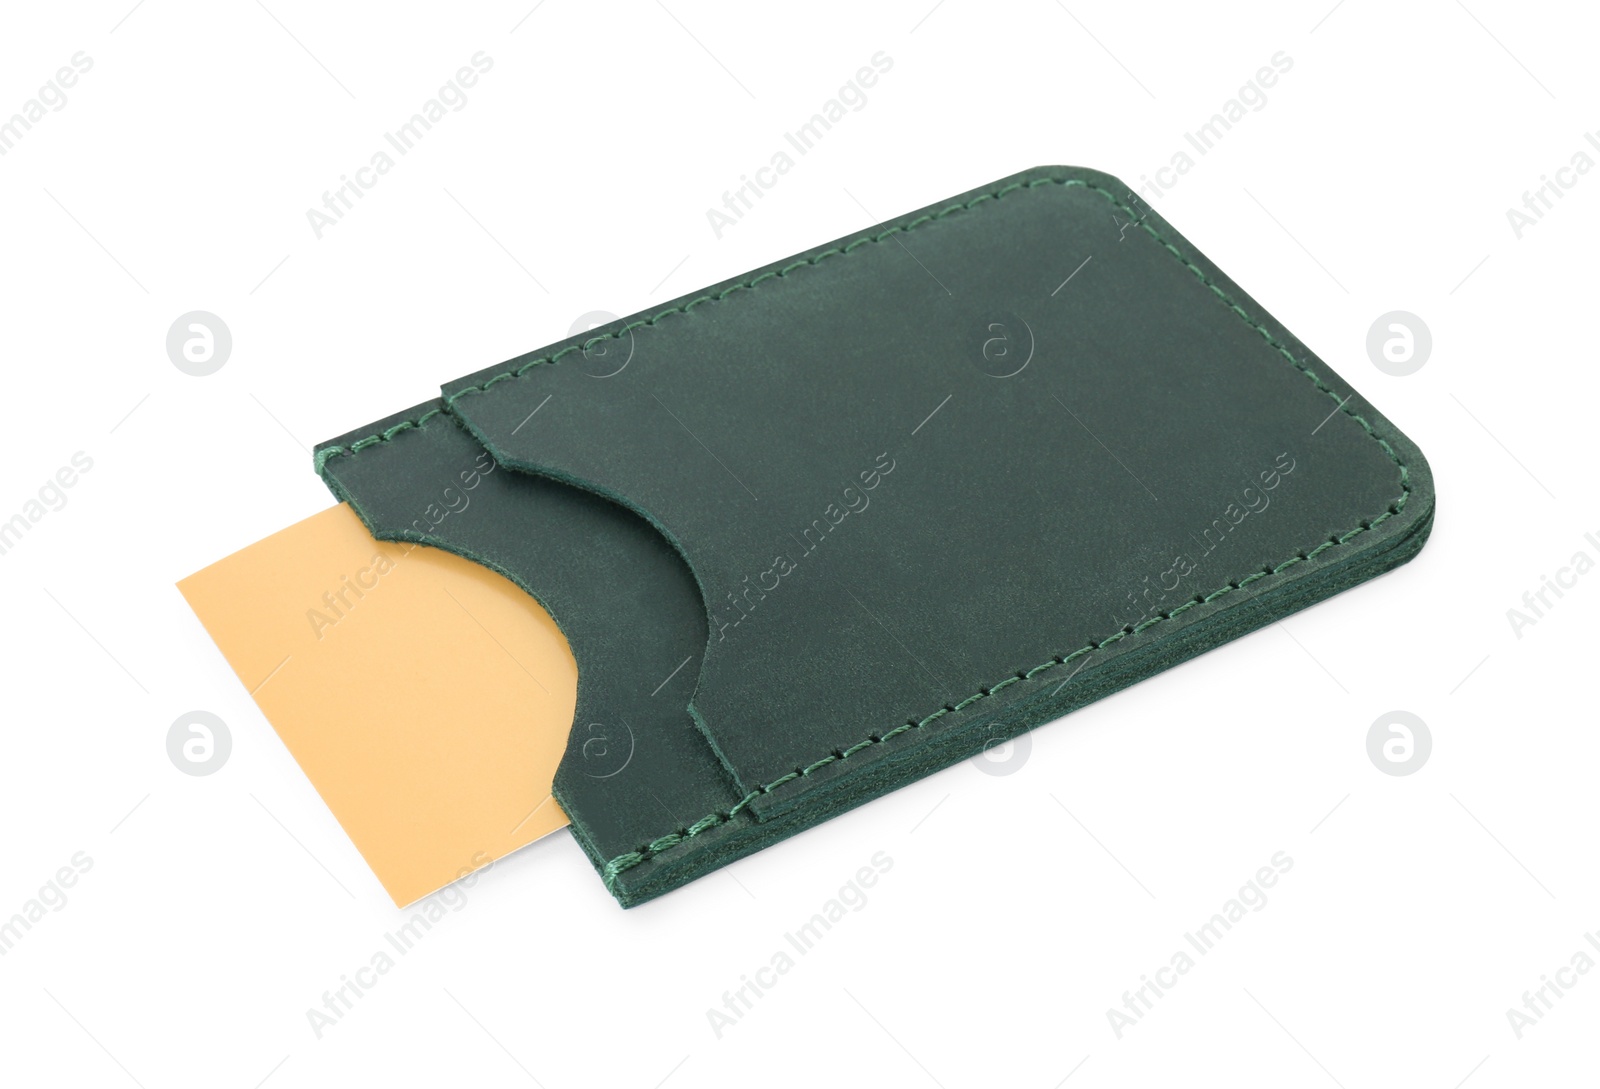 Photo of Leather business card holder with card isolated on white